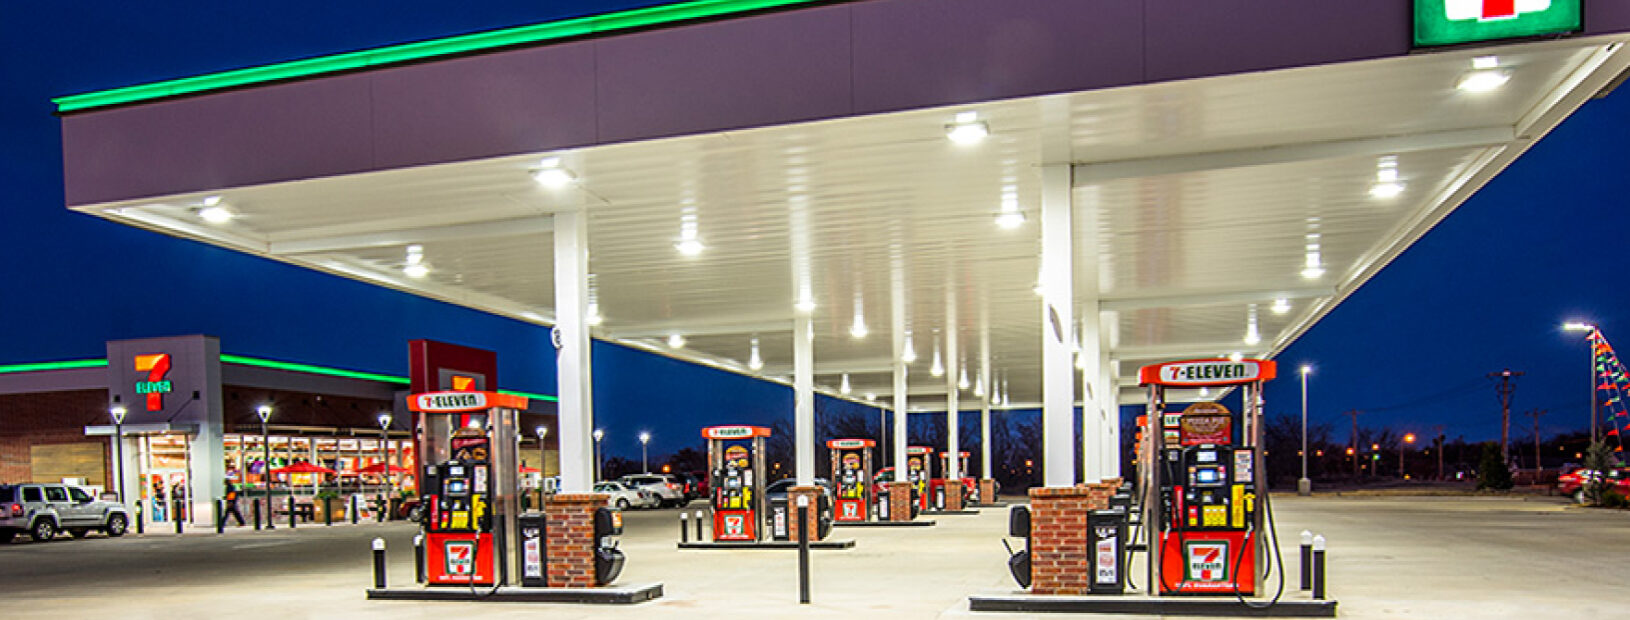 Wide-angle view of 7-Eleven gas station and c-store with fuel pumps in foreground.